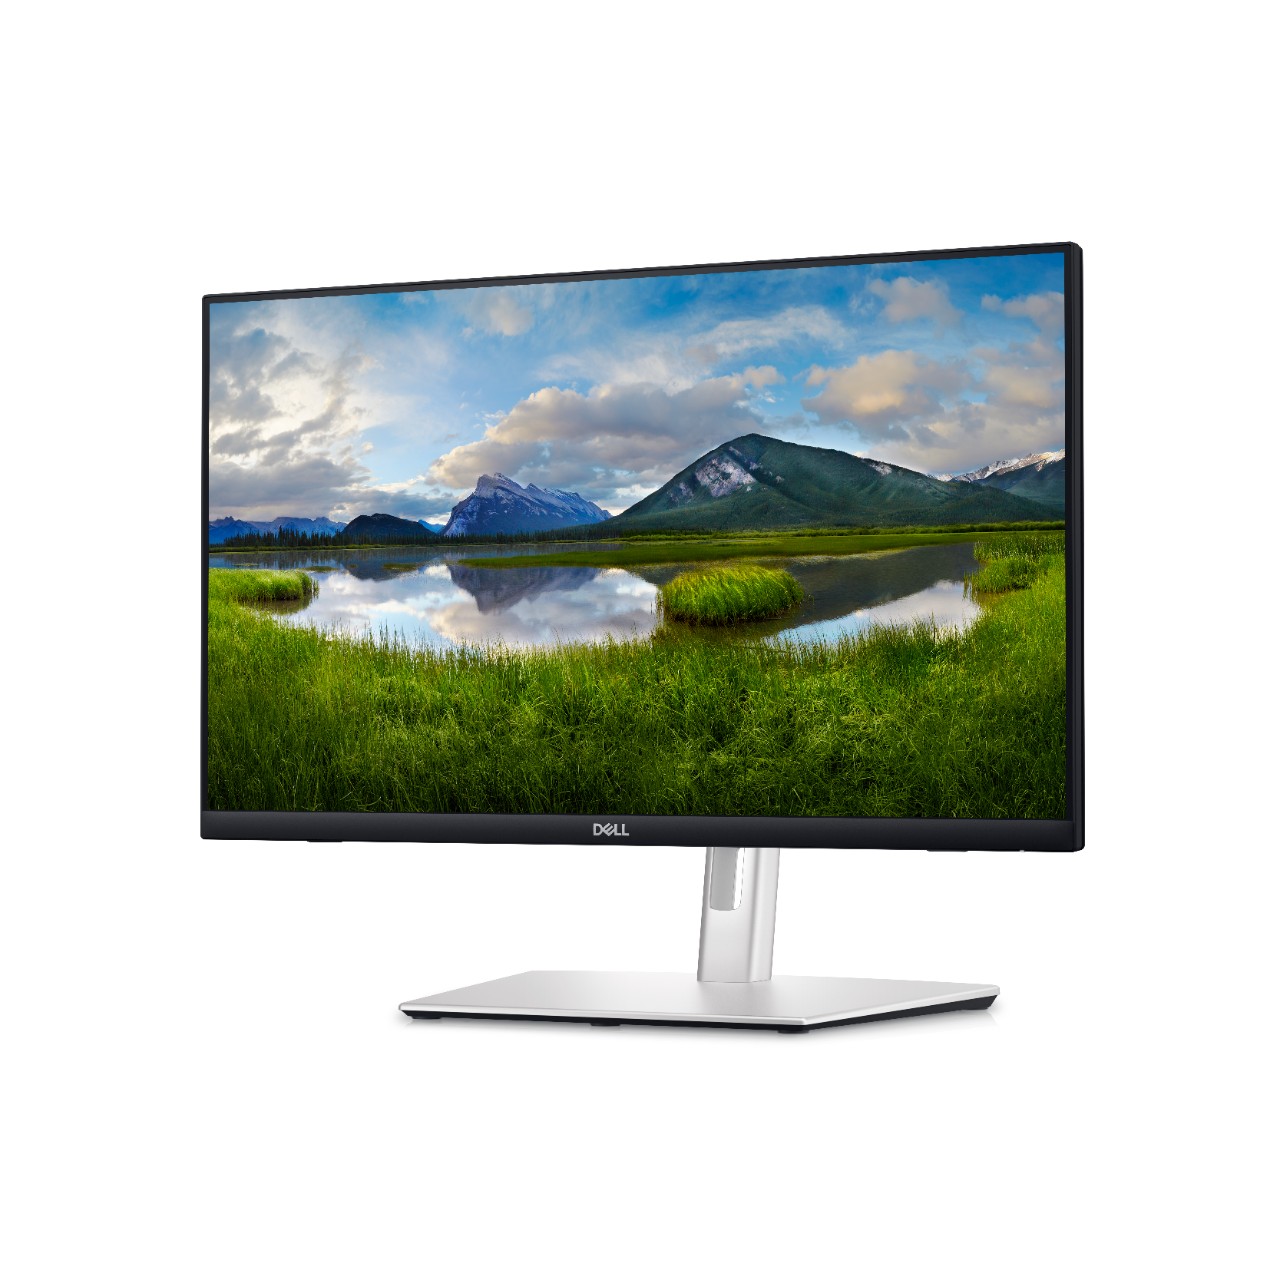 Dell Introduces 24 Touch USB-C Hub Monitor Designed For Clutter-Free Productivity 